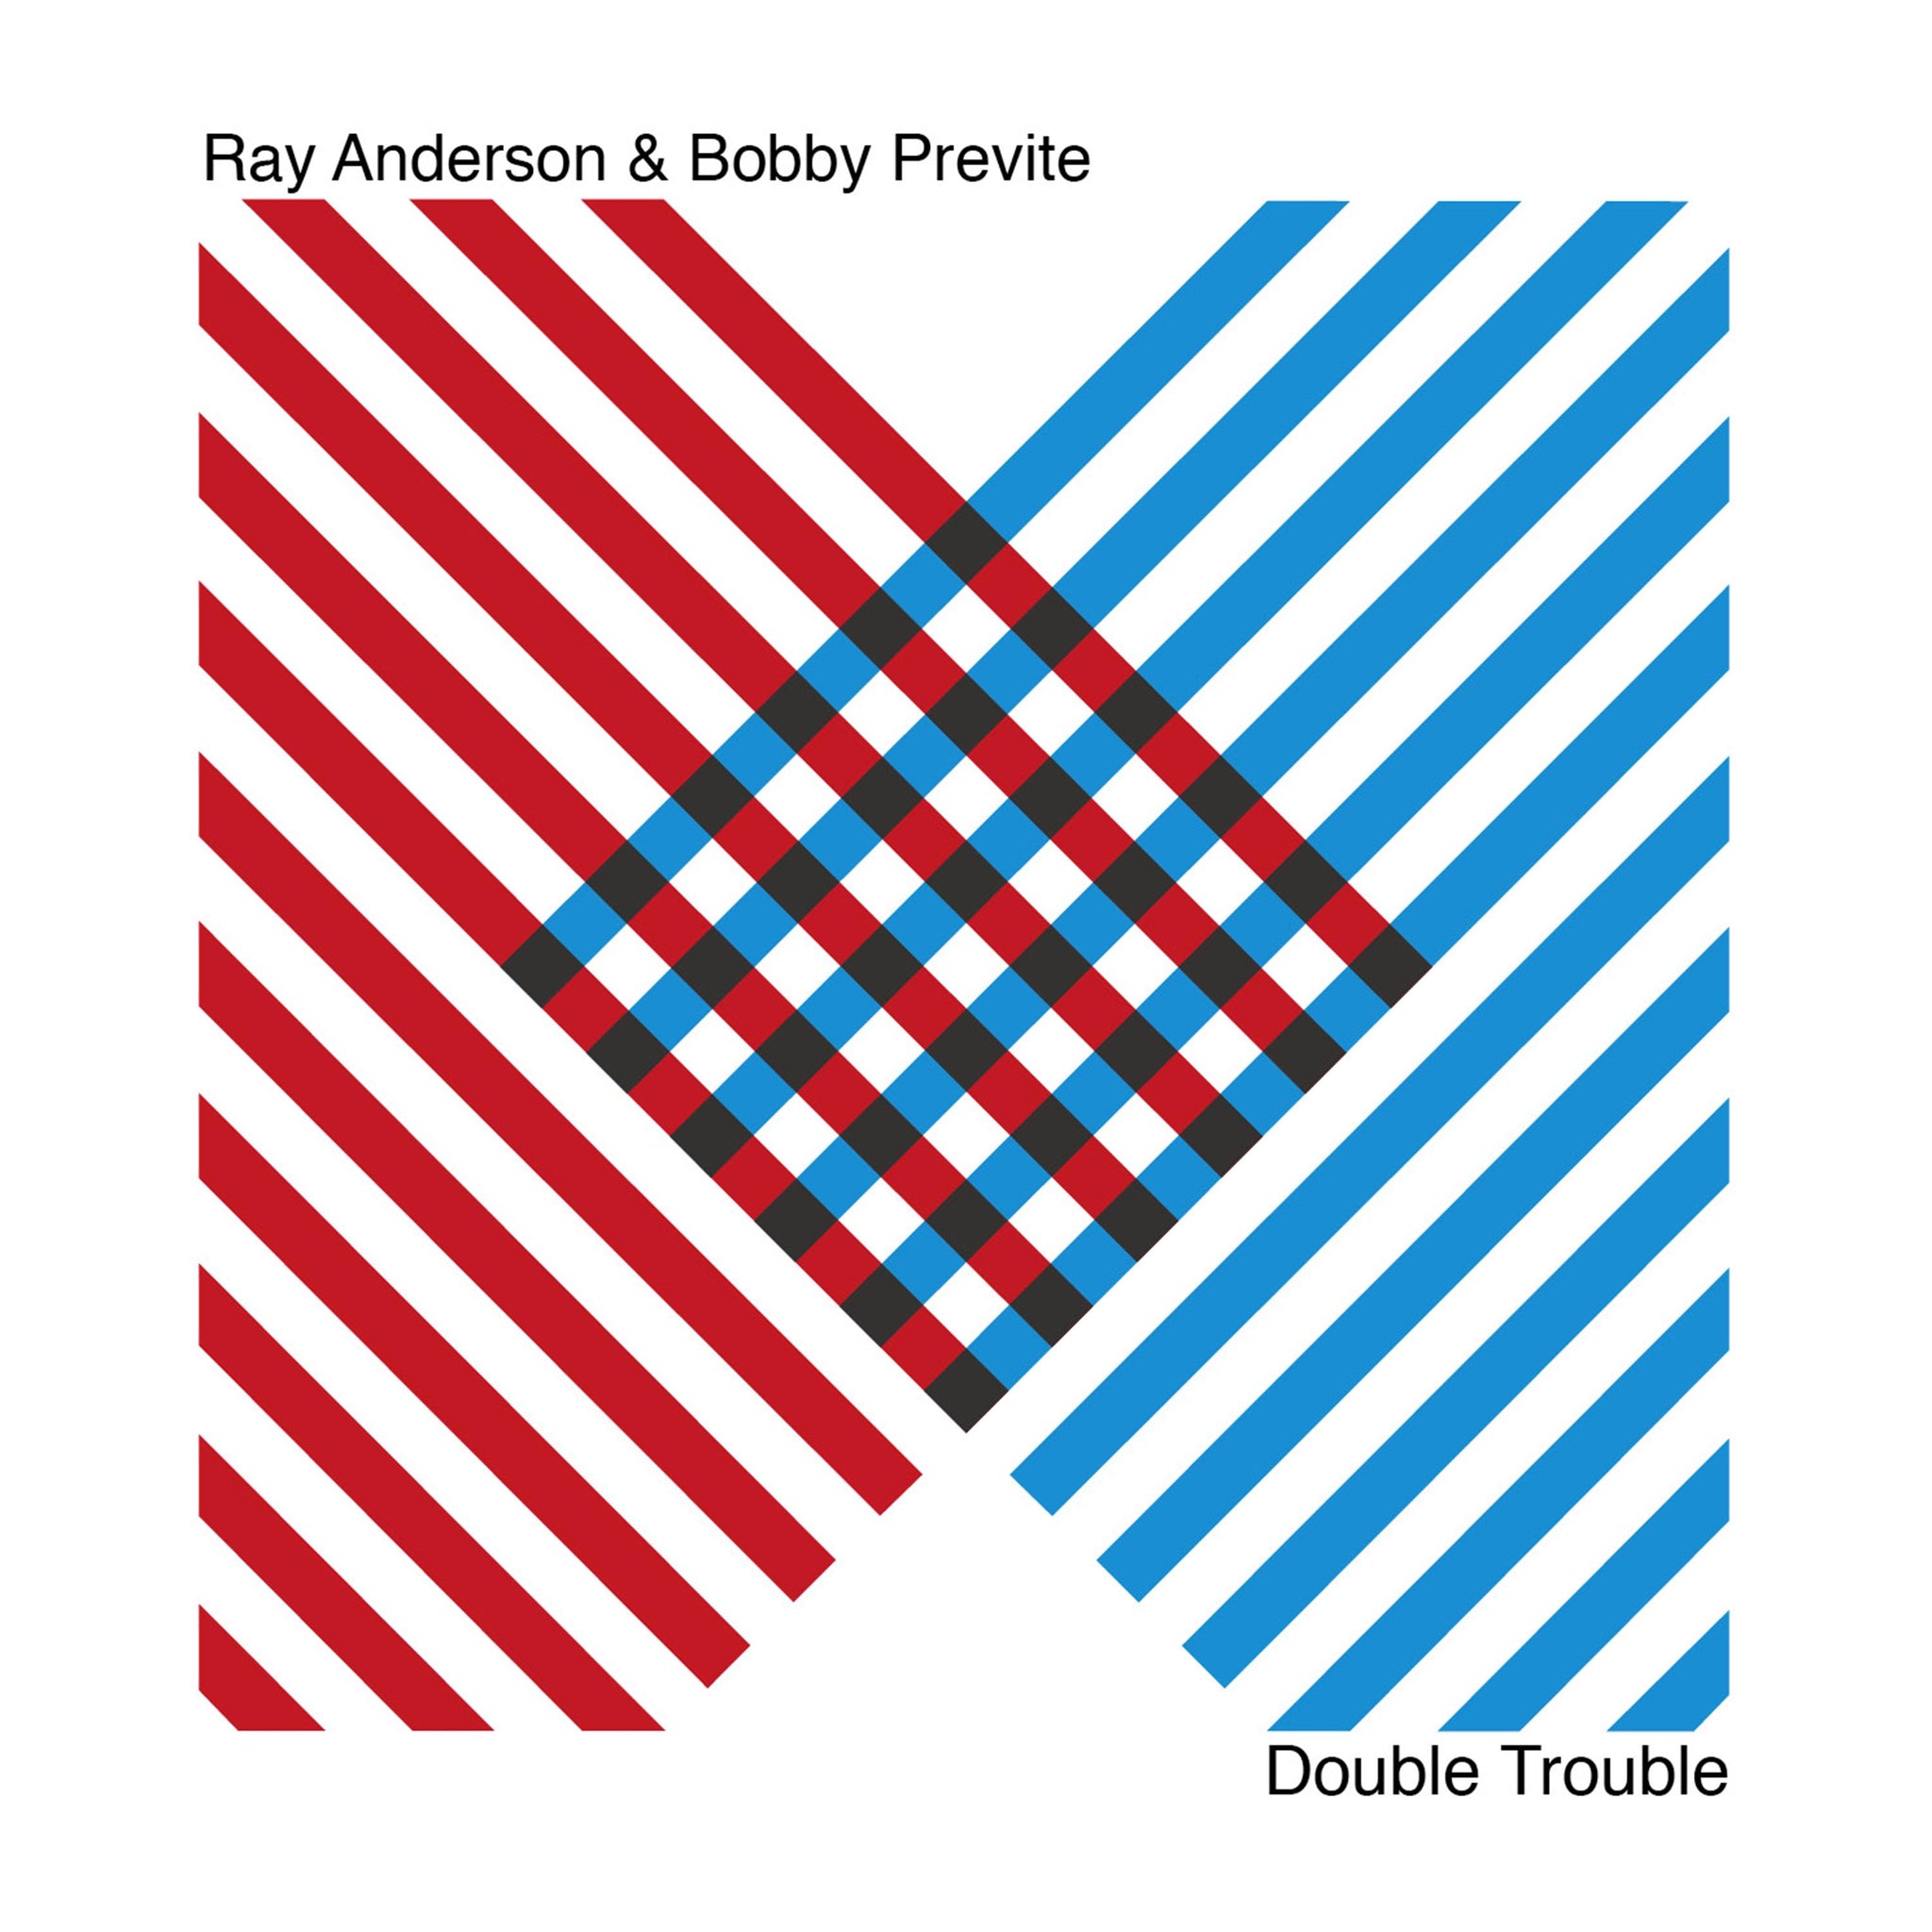 Double Trouble / Ray Anderson & Bobby Previte